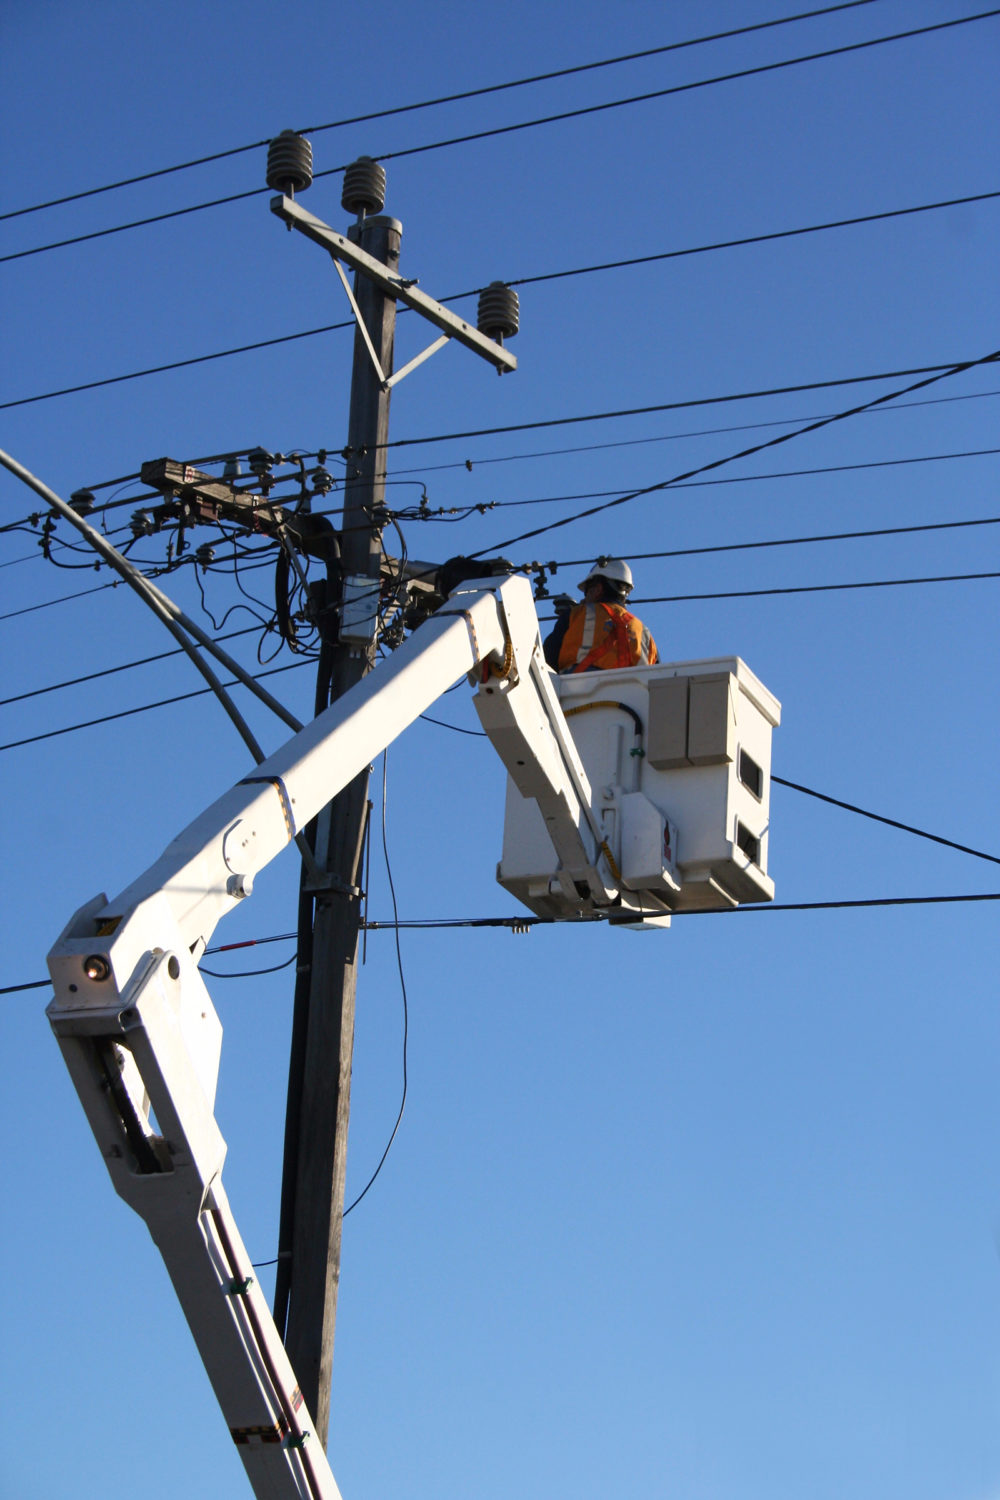 A man in an aerial lift working on power lines.